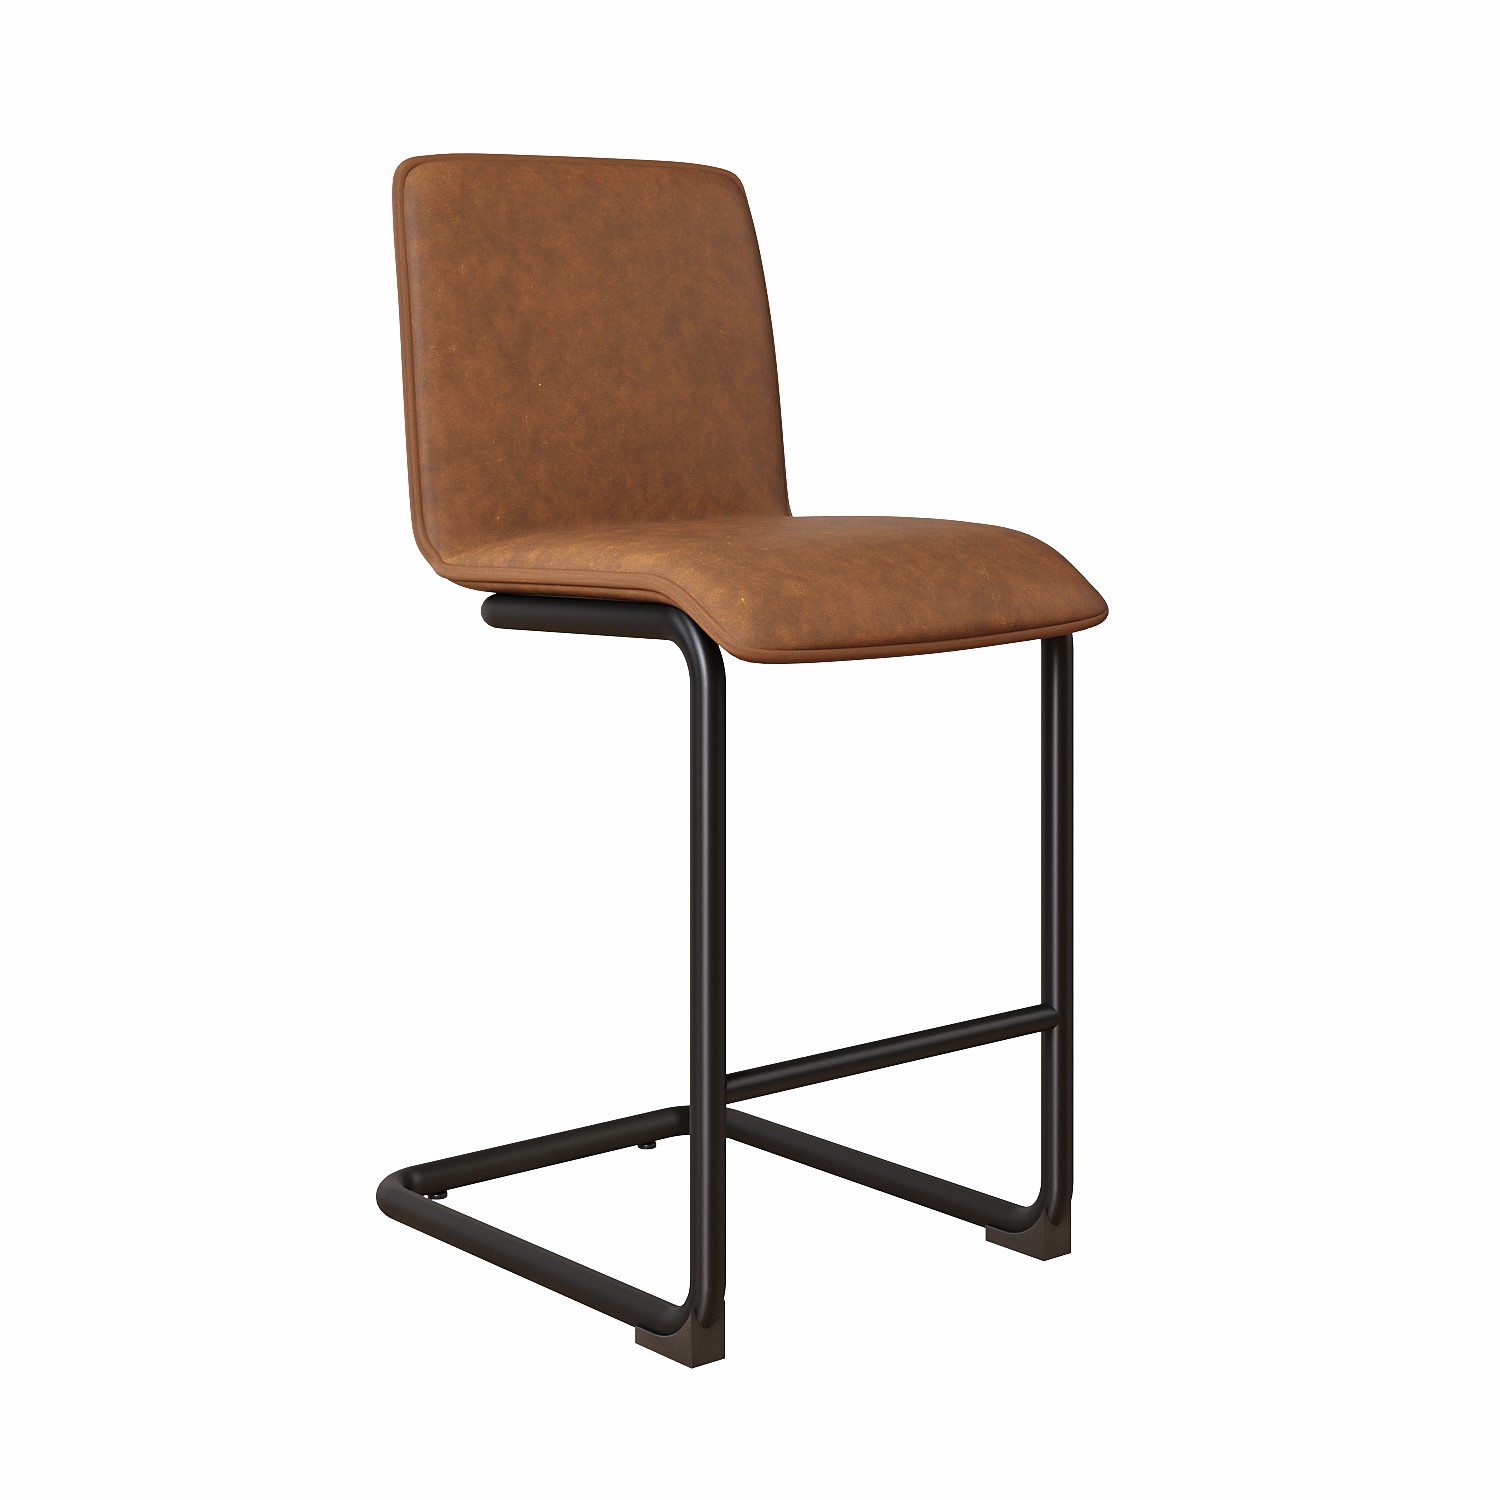 Photo of Tan faux leather cantilever kitchen stool with back - 66cm - lucas